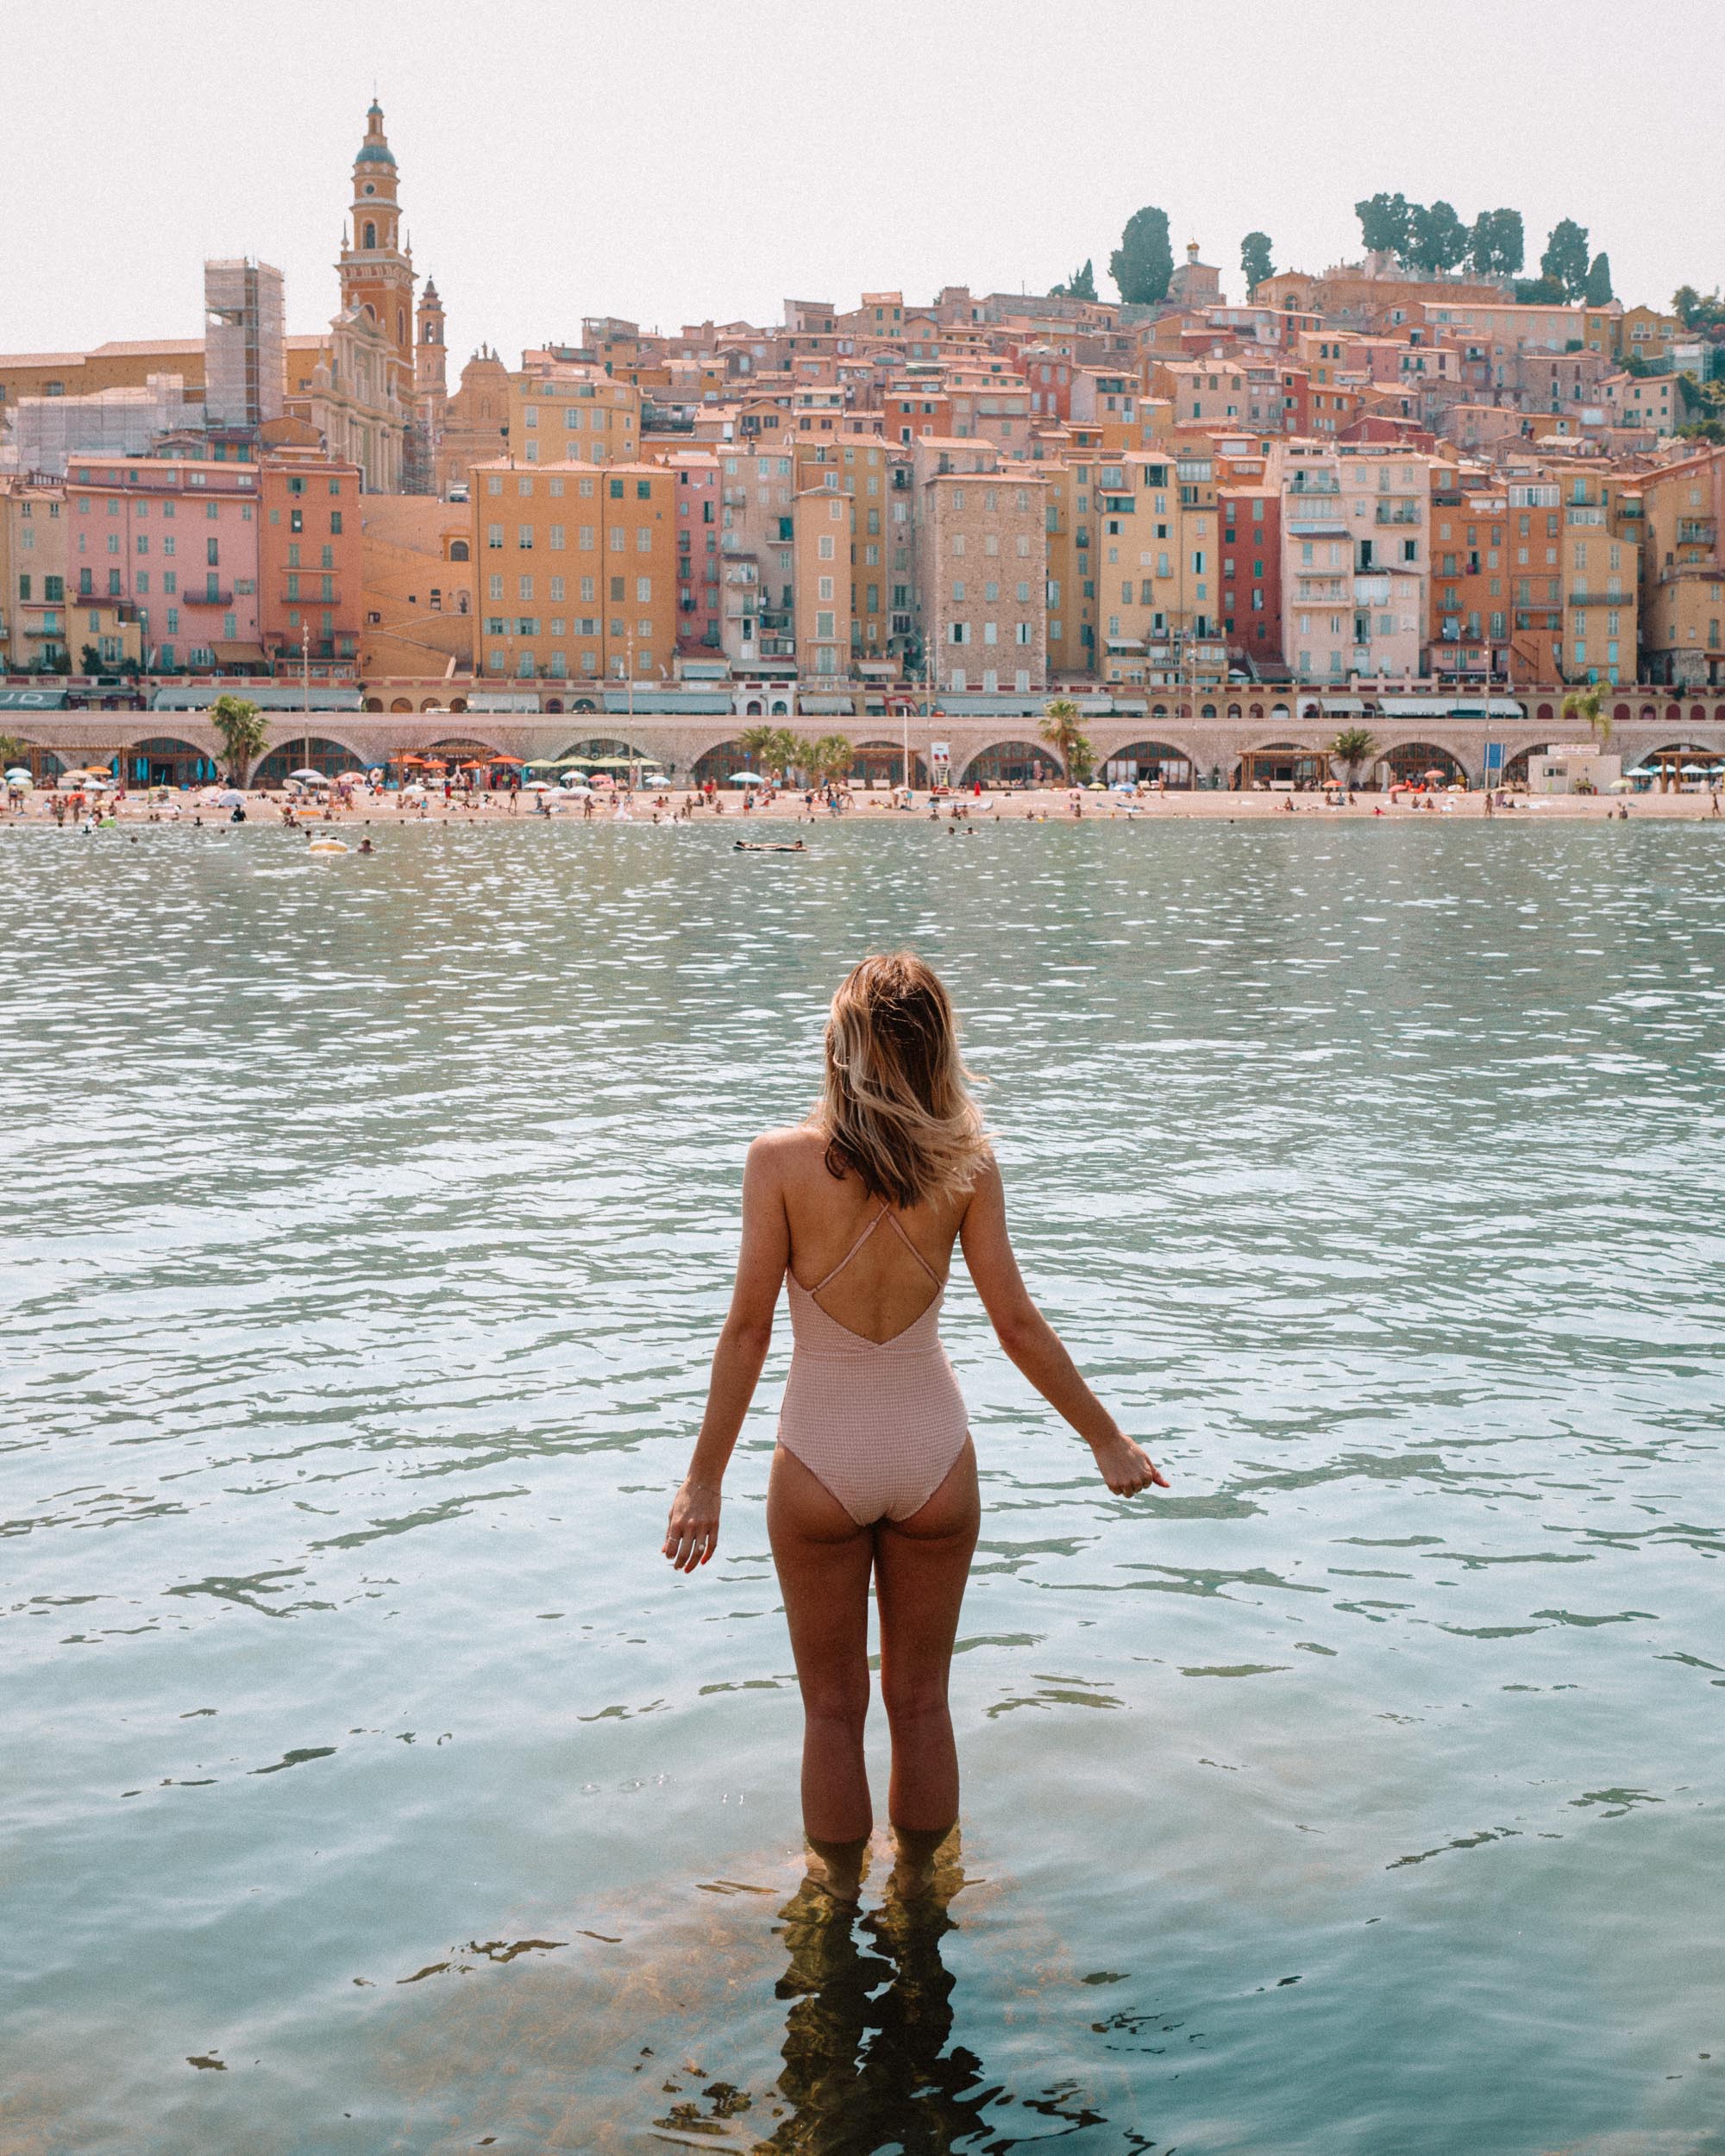 Menton beach in the French Riviera